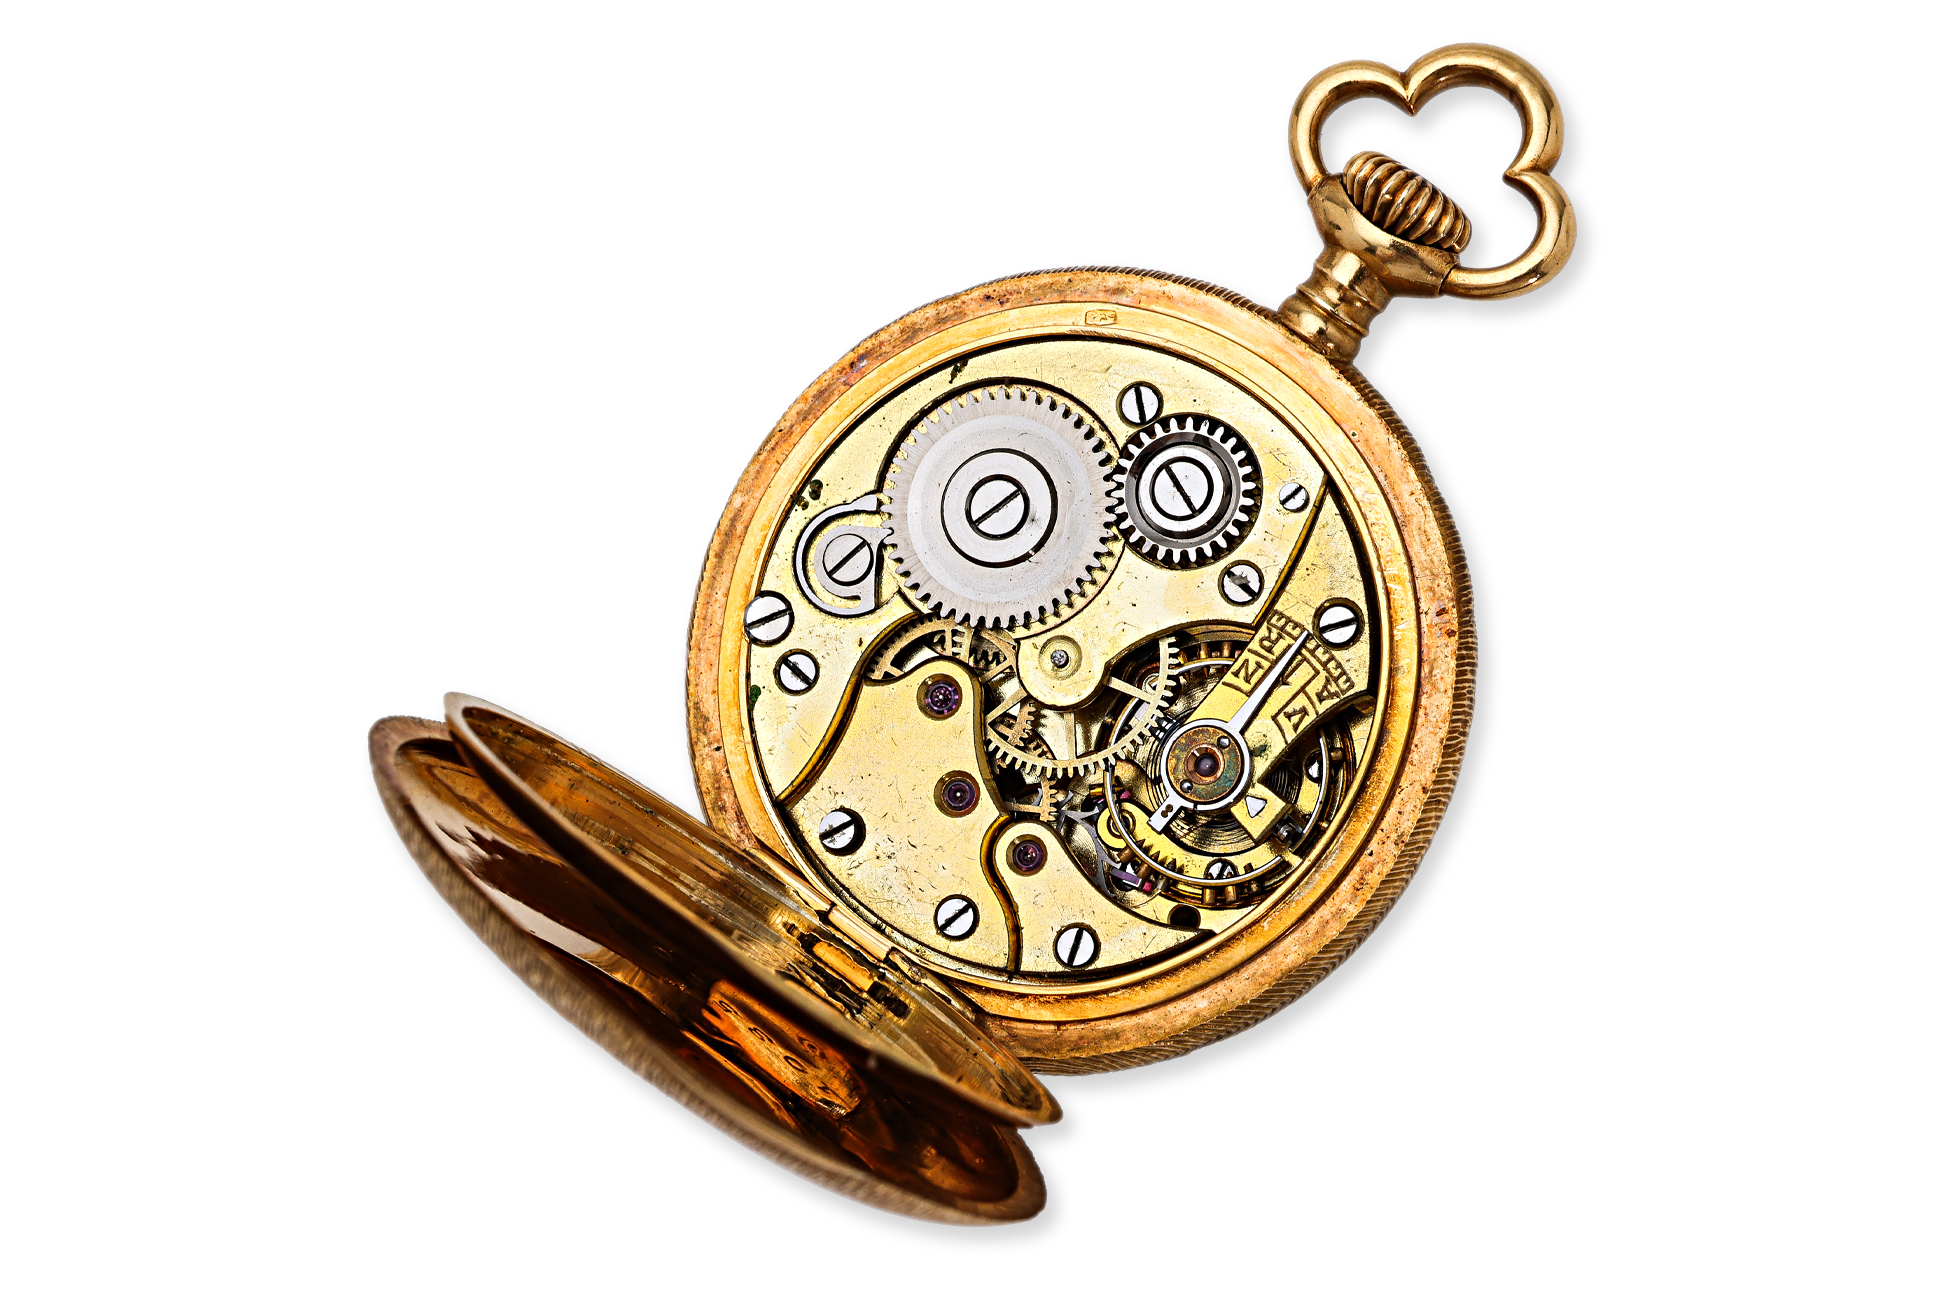 A SWISS LADIES 18K GOLD POCKET WATCH - Image 3 of 3